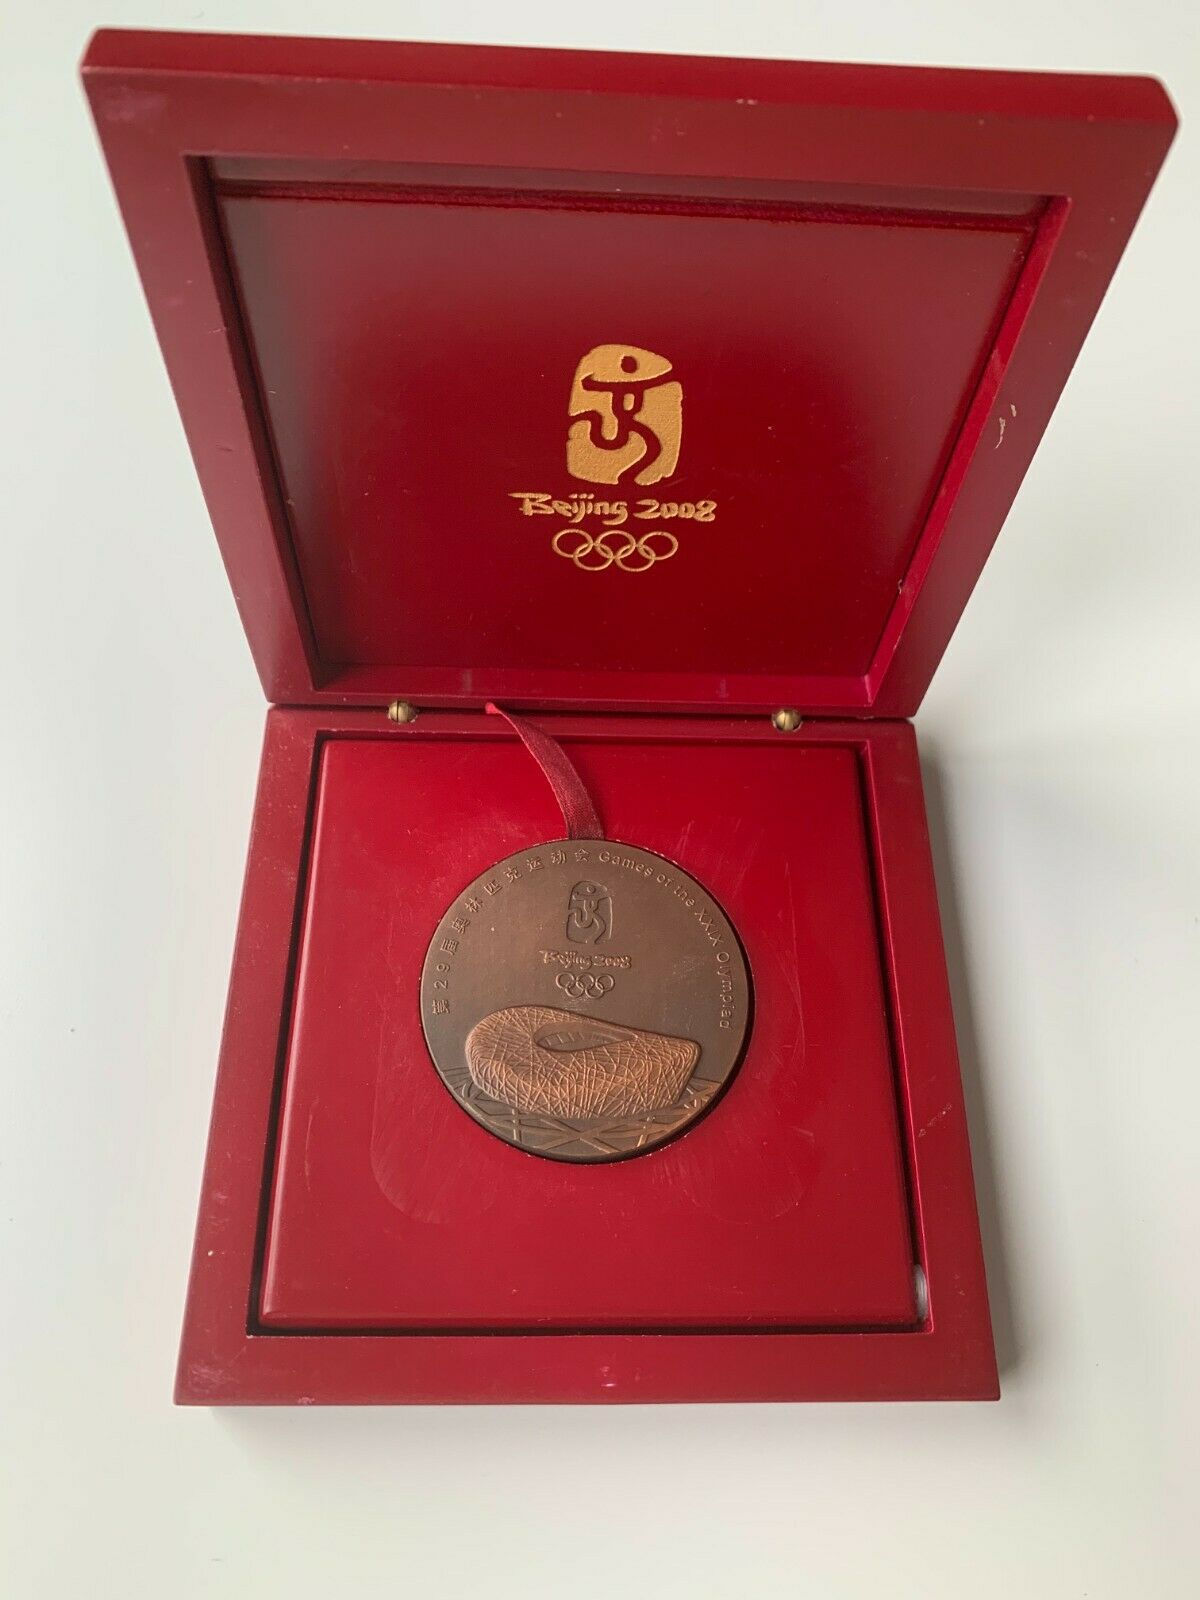 Beijing 2008 Olympic Participation Medal In Wooden Box Original Rarity